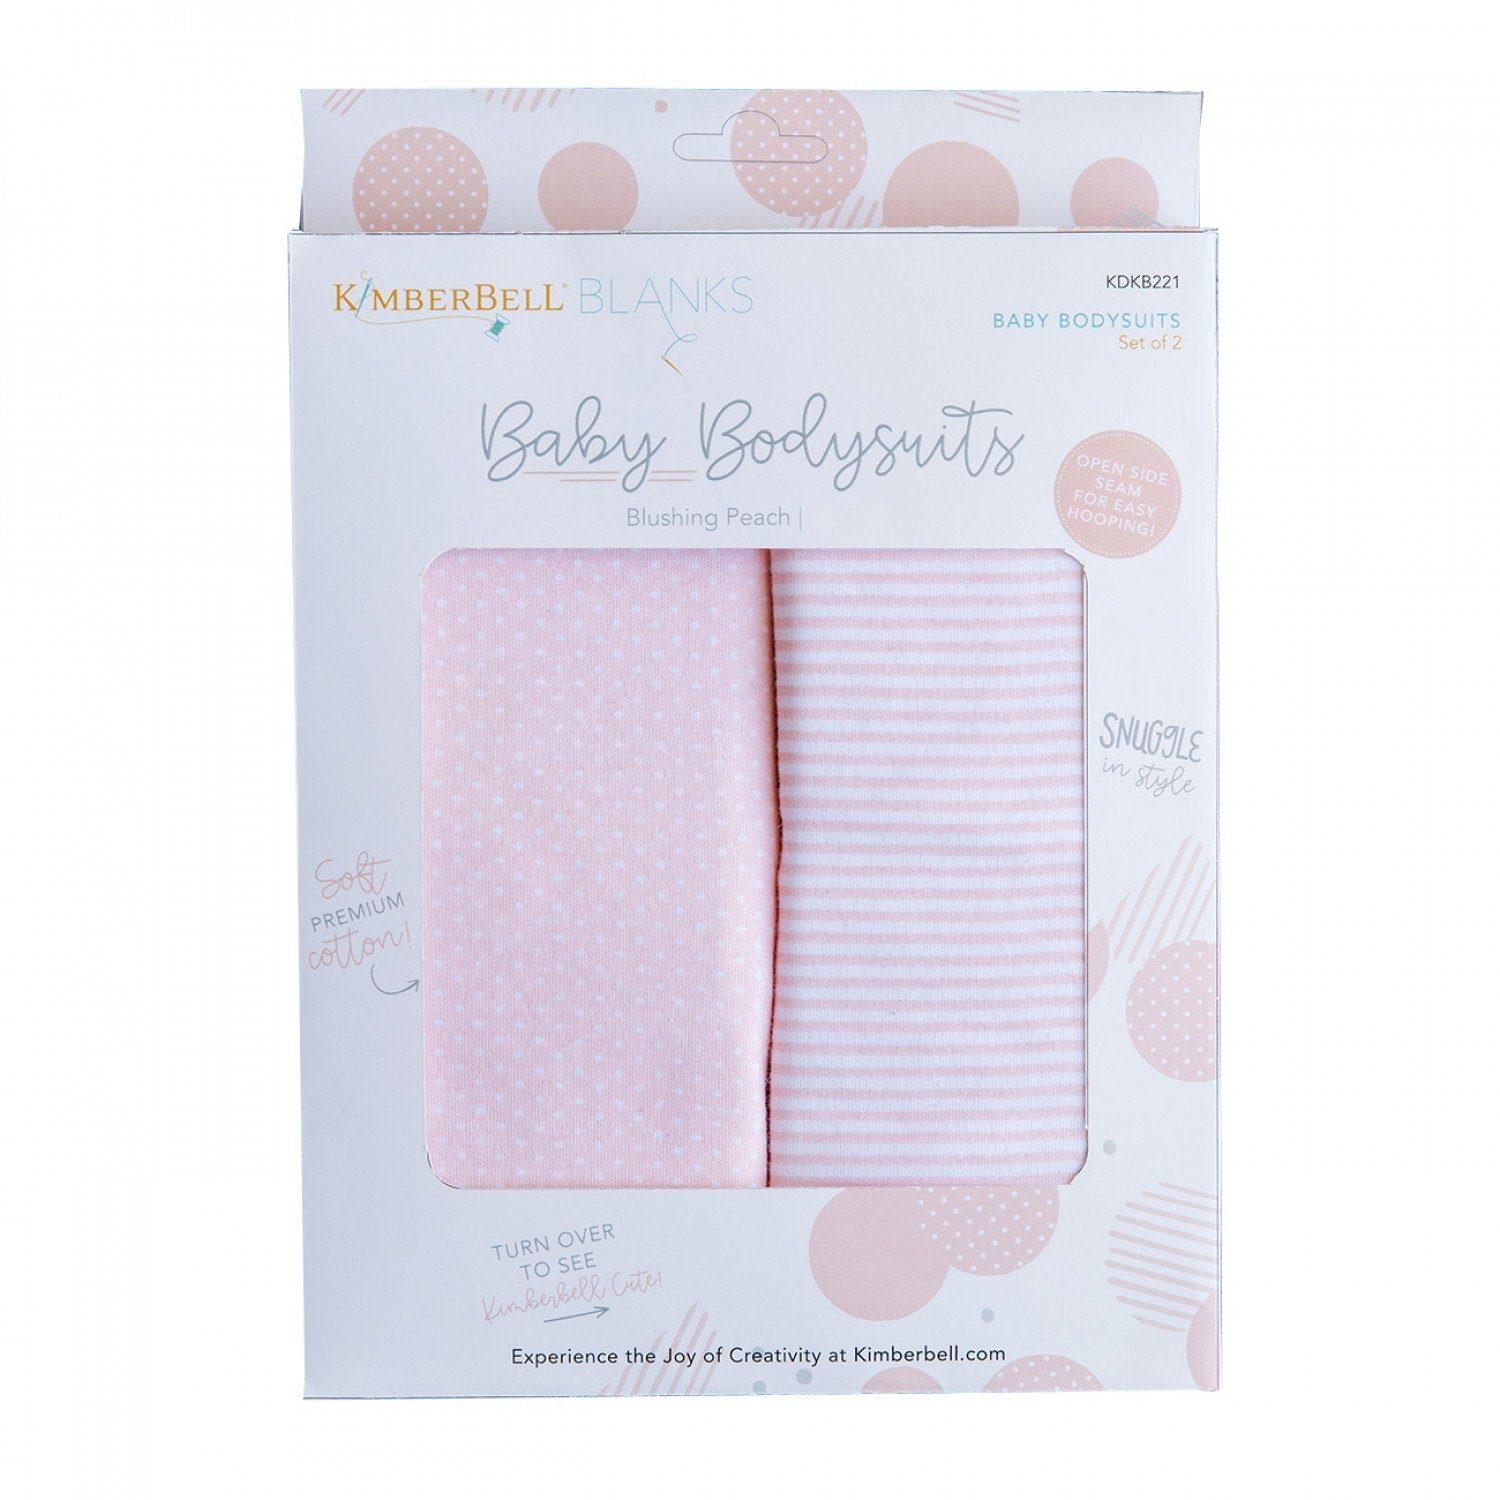 Baby Bodysuits - Blushing Peach -  (9-12 Months) - Pack of 2 - Kimberbell - Kawartha Quilting and Sewing LTD.